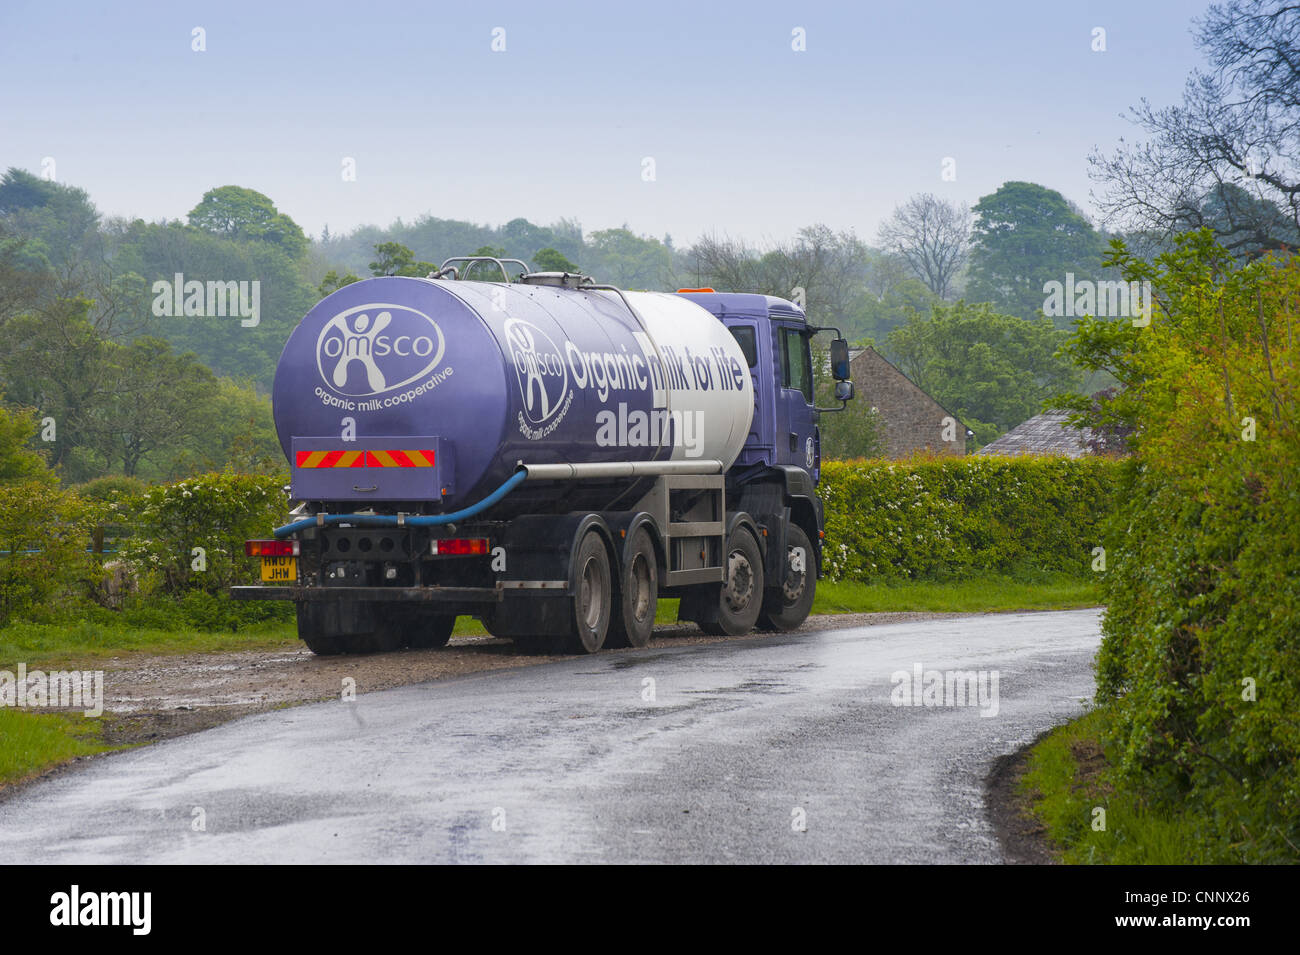 OMSCO Organic Milk Cooperative tanker, used for collecting organic milk, Chipping, Lancashire, England, may Stock Photo